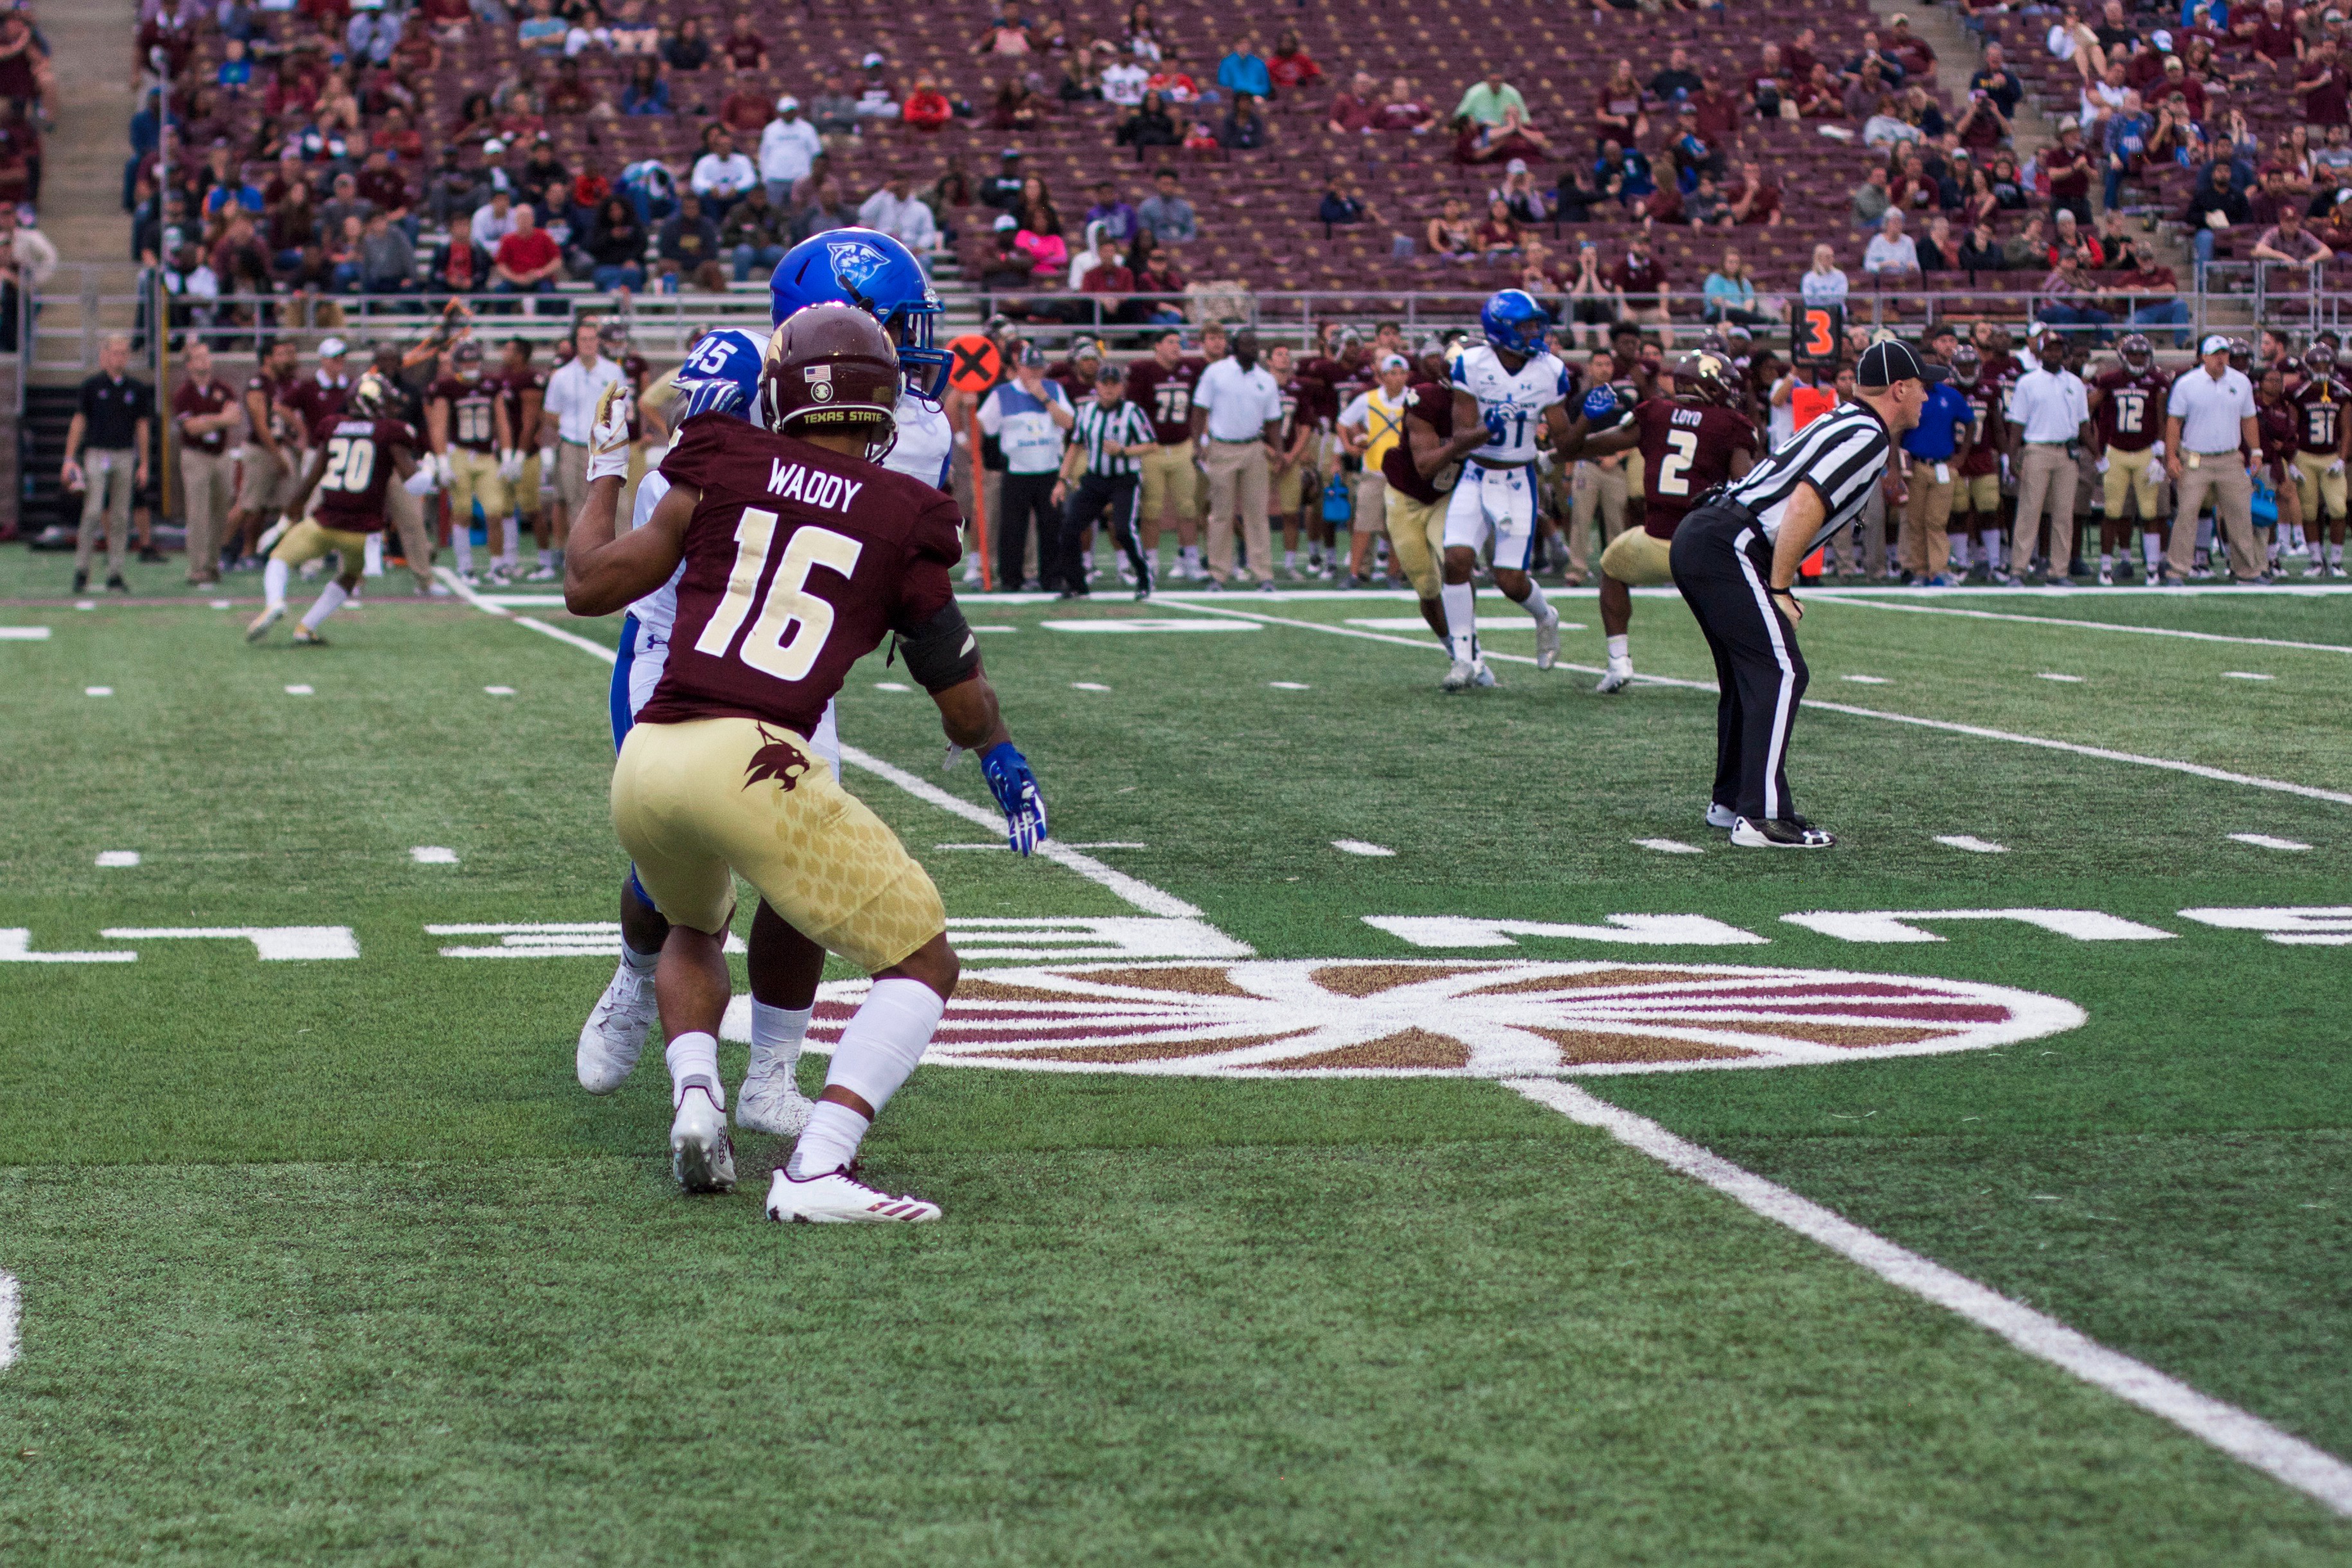 Jashon Waddy, number 16, combats a white jersey, blue-helmeted Georgia State wide receiver, number 45, on the peripheral of the field. Last season, Waddy was a cornerback who fought with an urgent physicality; him leading in that same style will be a major factor against the New Mexico State spread.